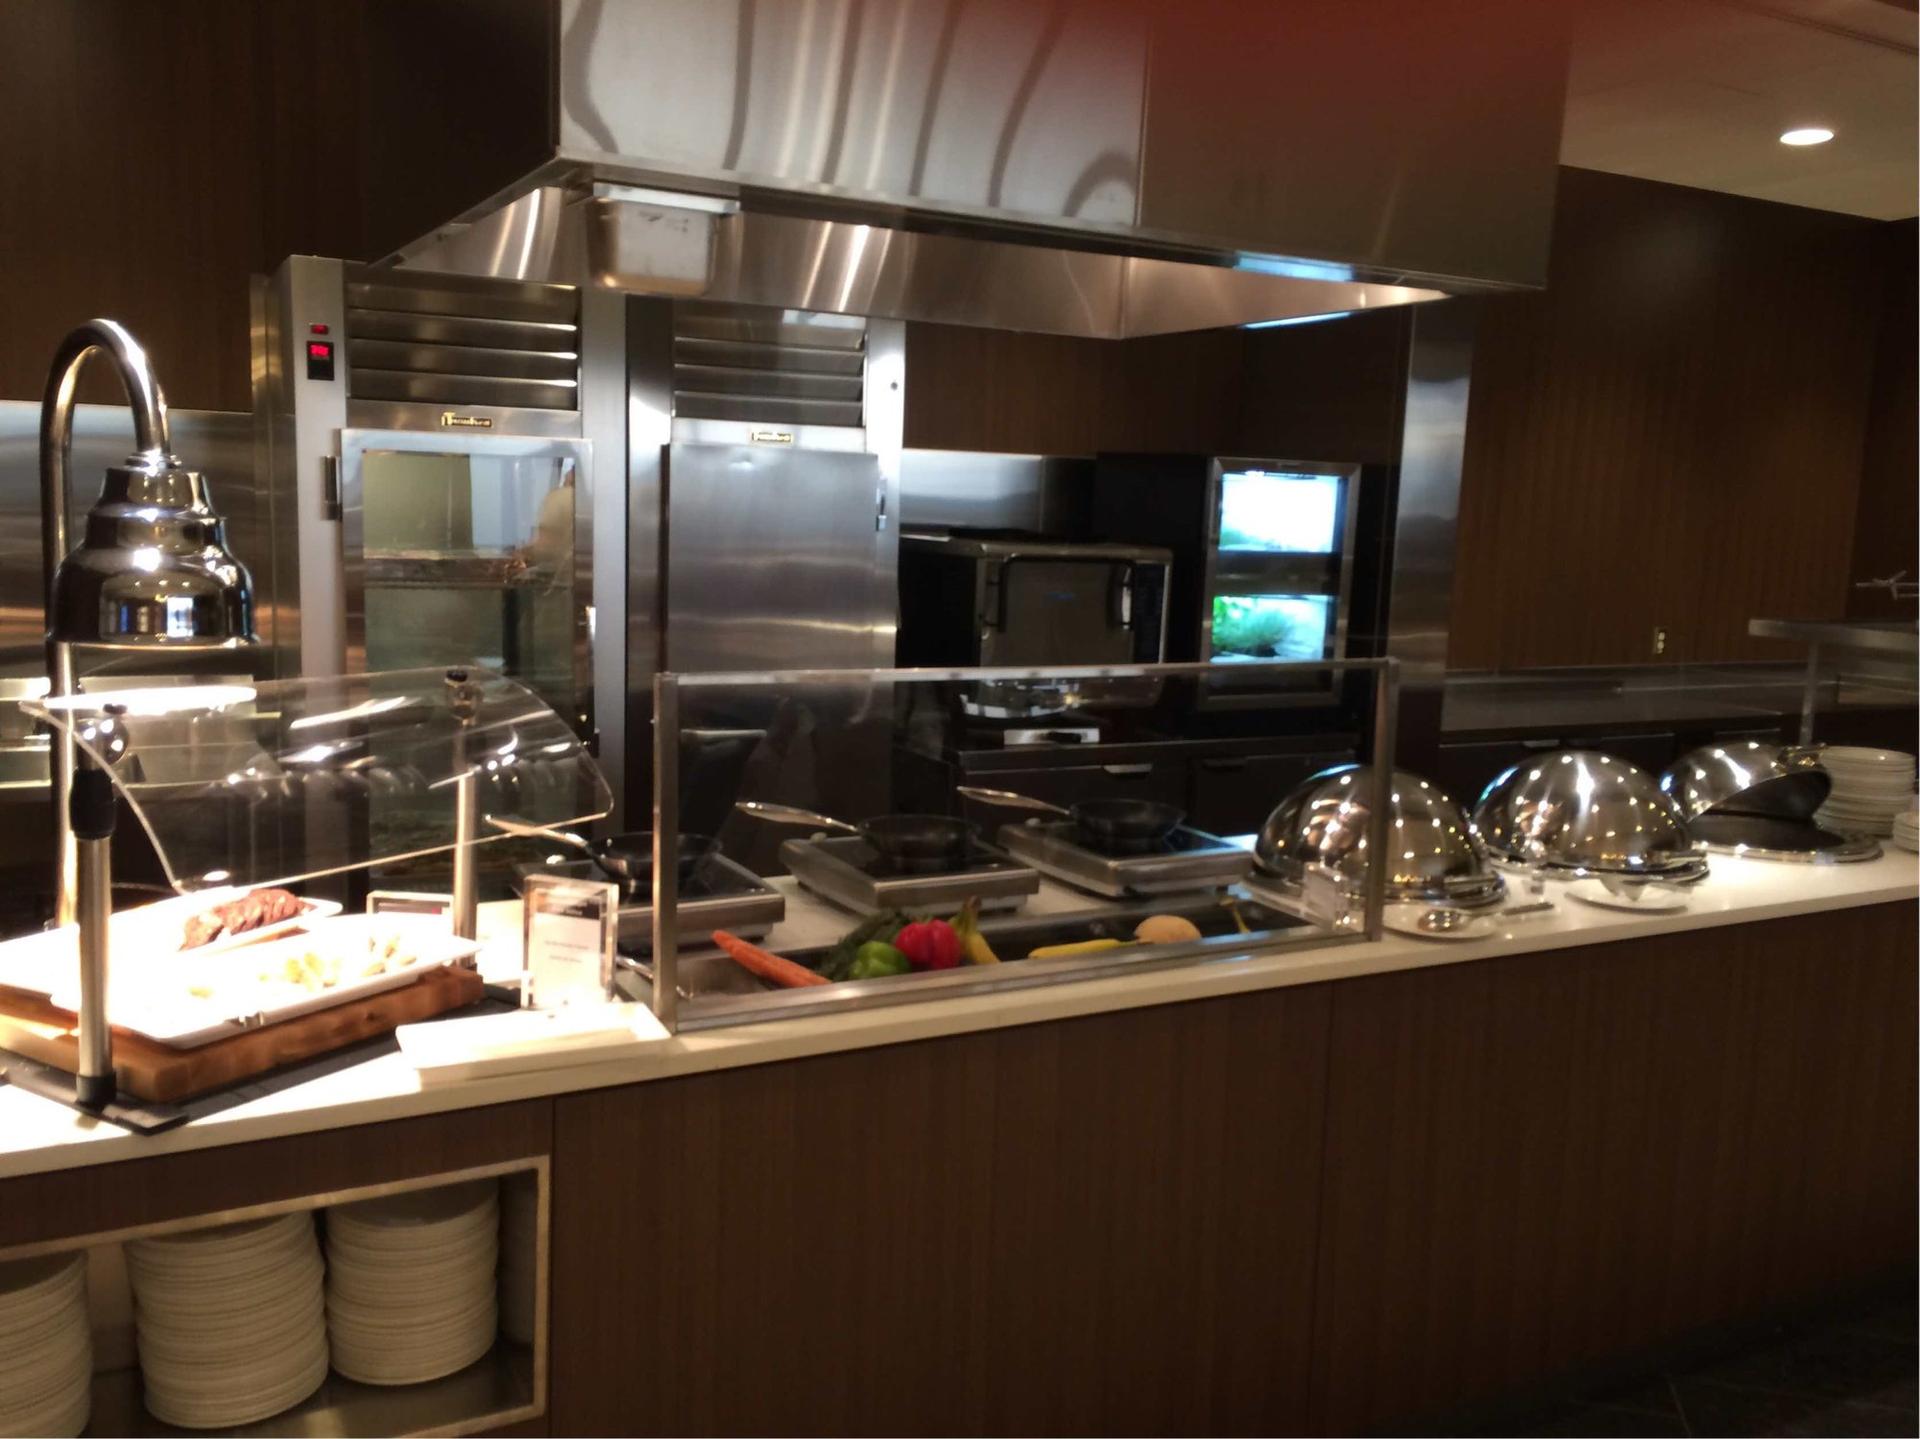 Air Canada Maple Leaf Lounge image 1 of 3